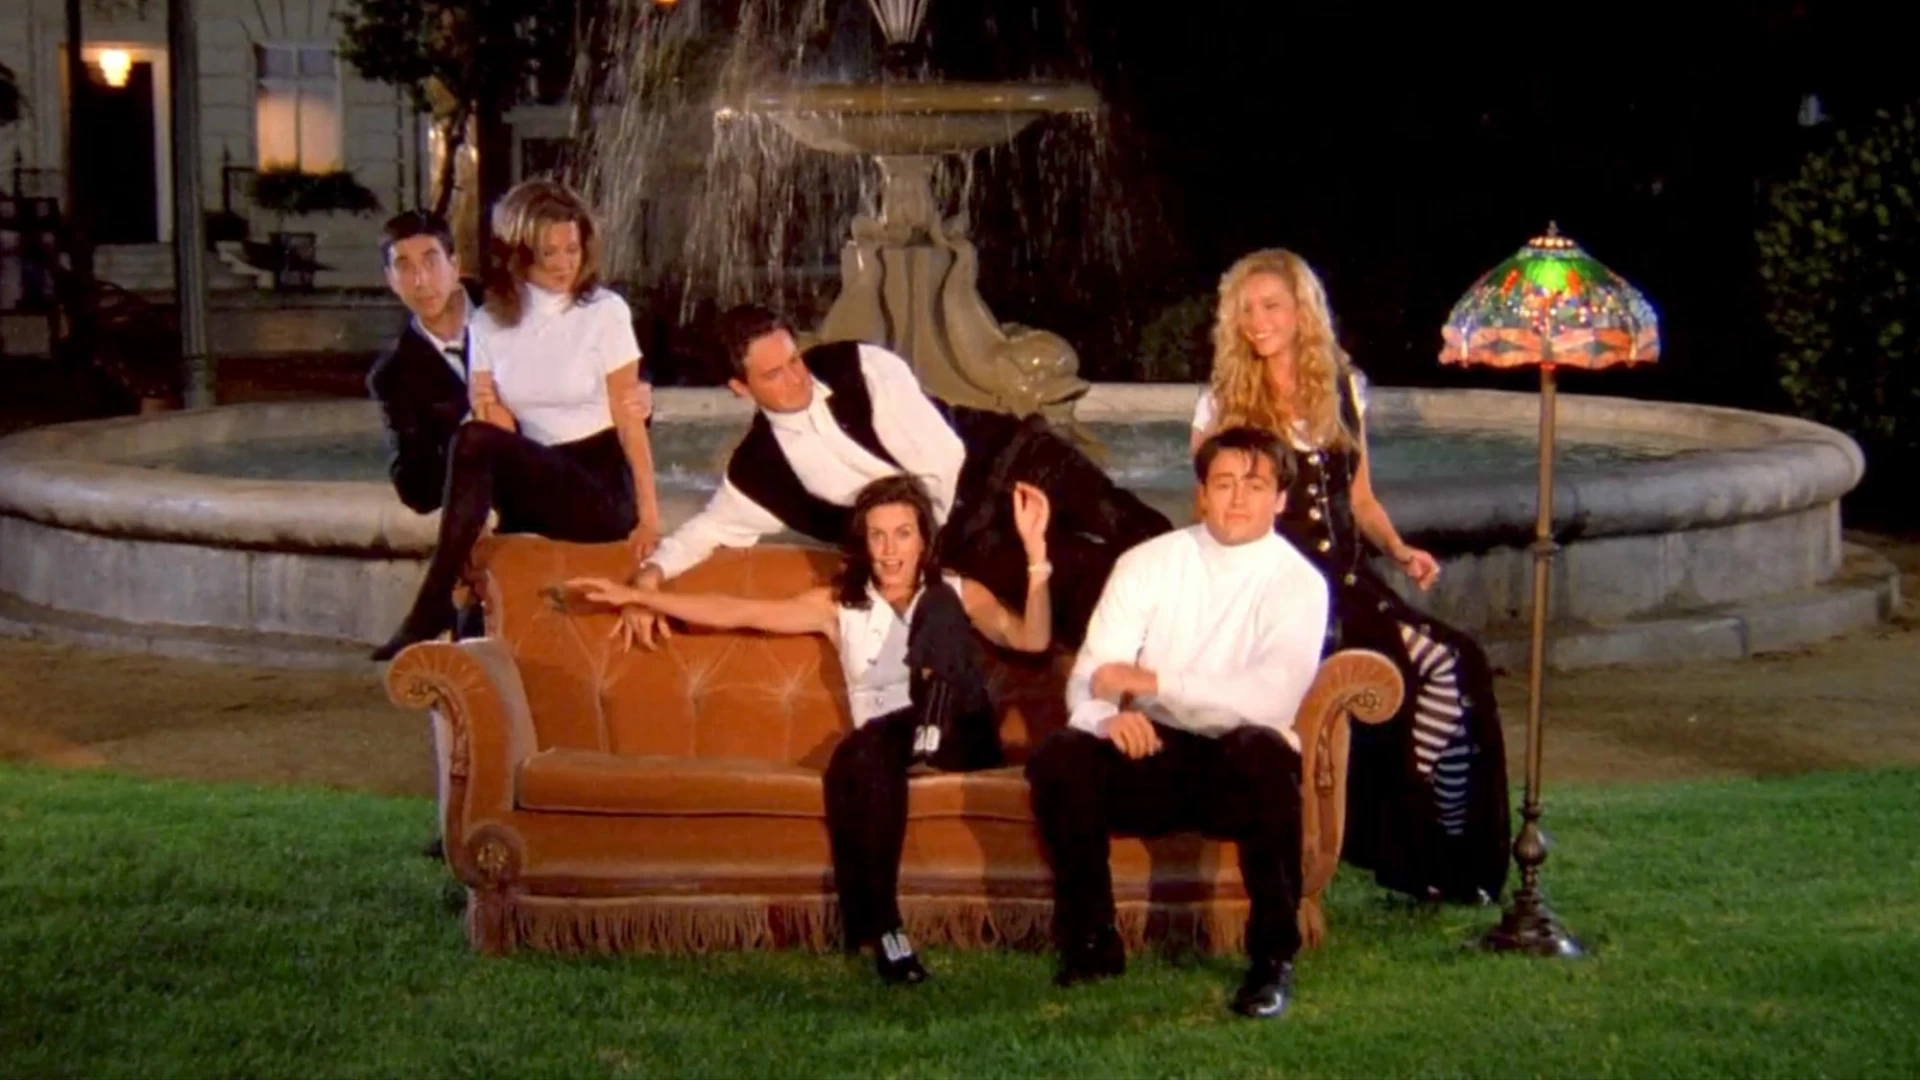 The Friends theme song, "I'll Be There For You," was one of the last great TV theme songs.